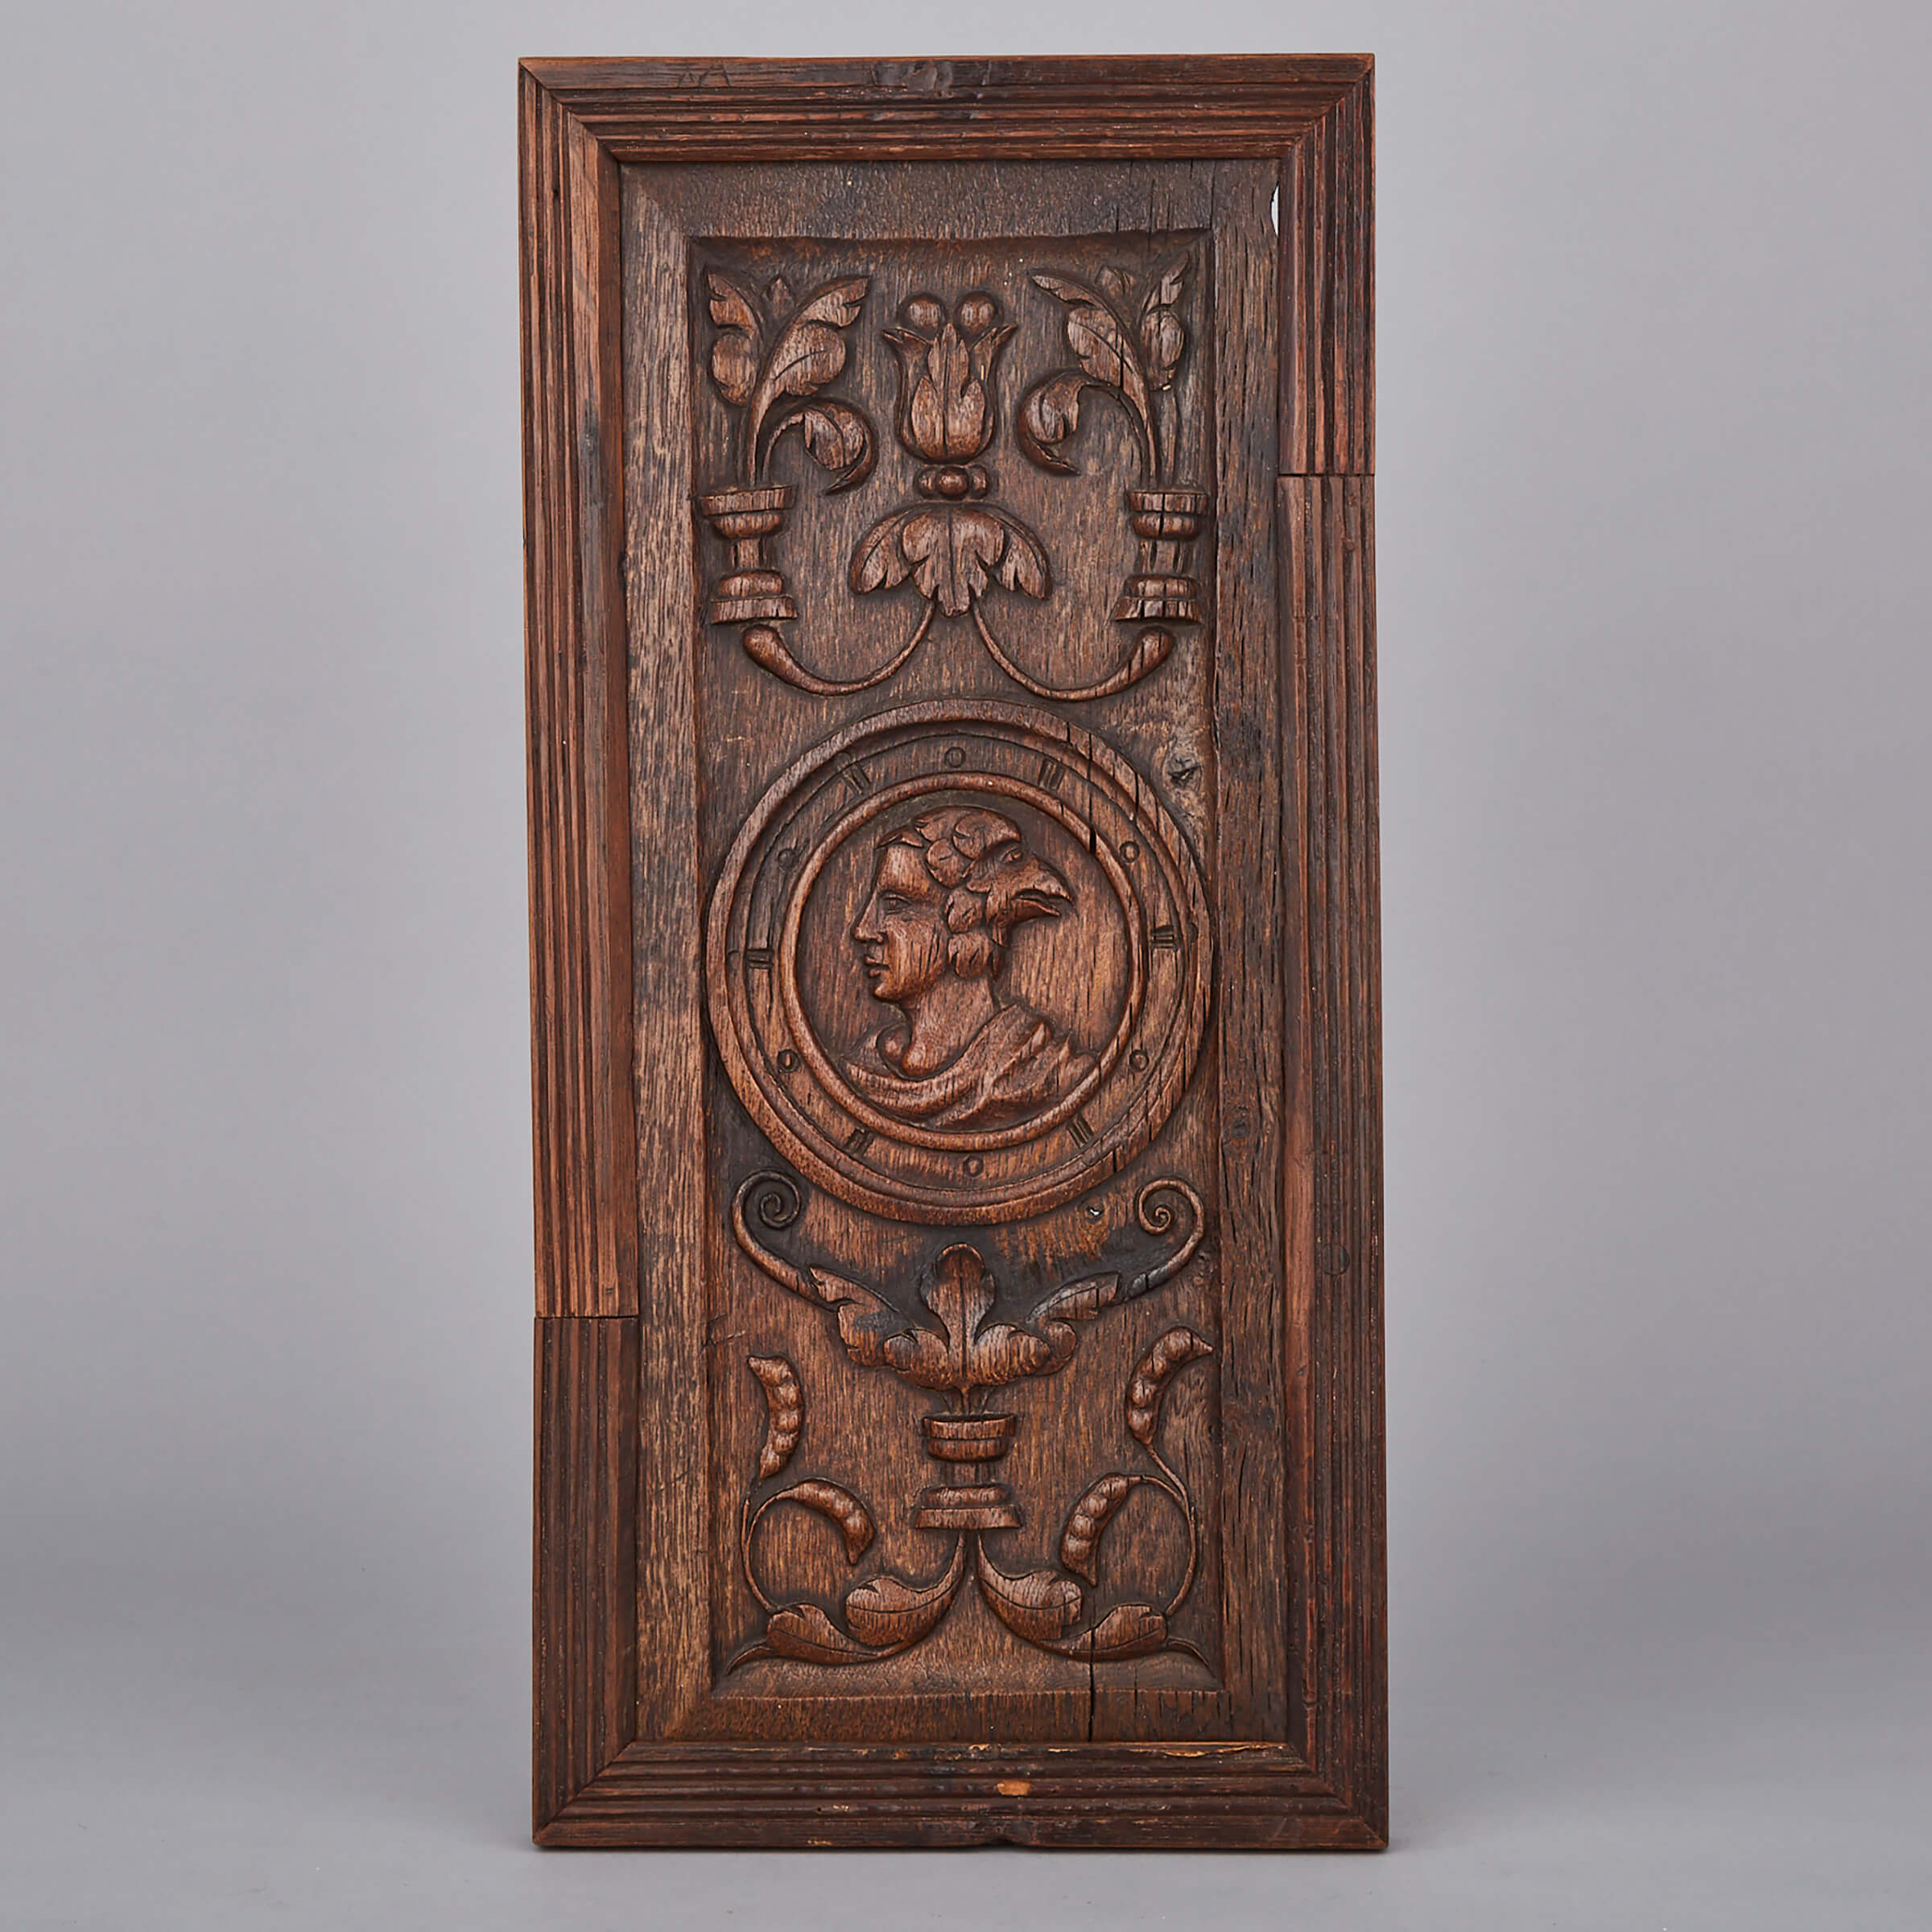 English Relief Carved Oak Romayne Panel, 16th centuy